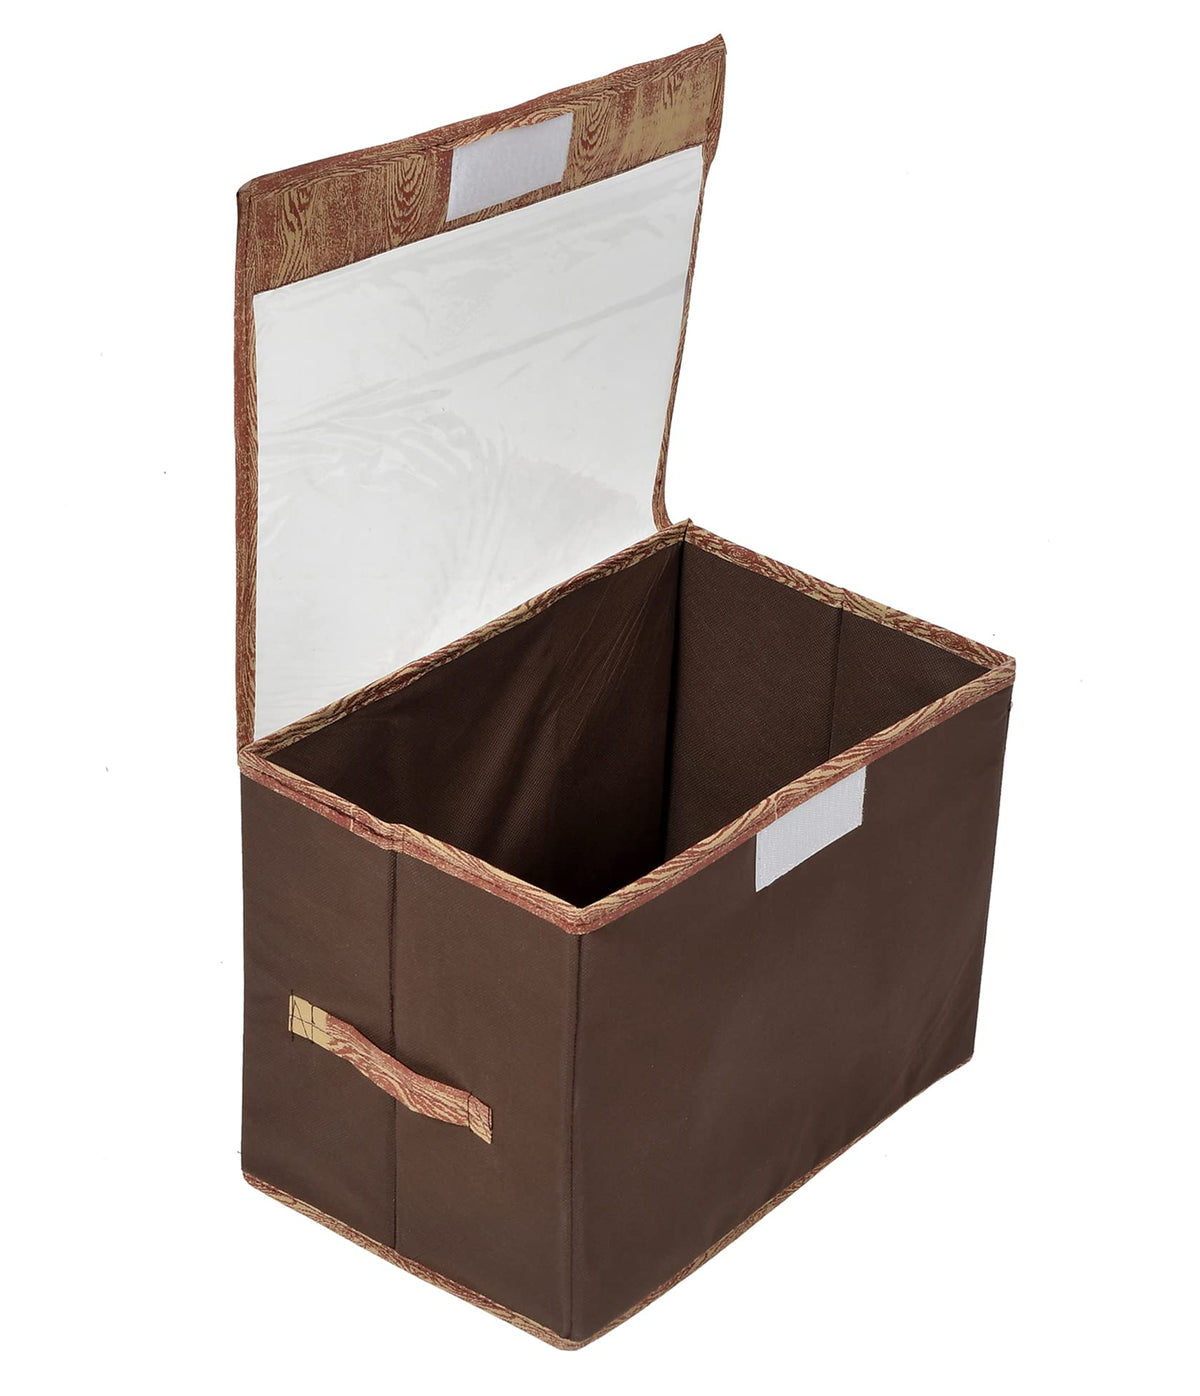 Kuber Industries Wooden Design Foldable Small Non-Woven Storage Box|Tranasparent Lid|Durable Handles|Size 35 x 18 x 22 CM (Brown)-44KM0430, Rectangular